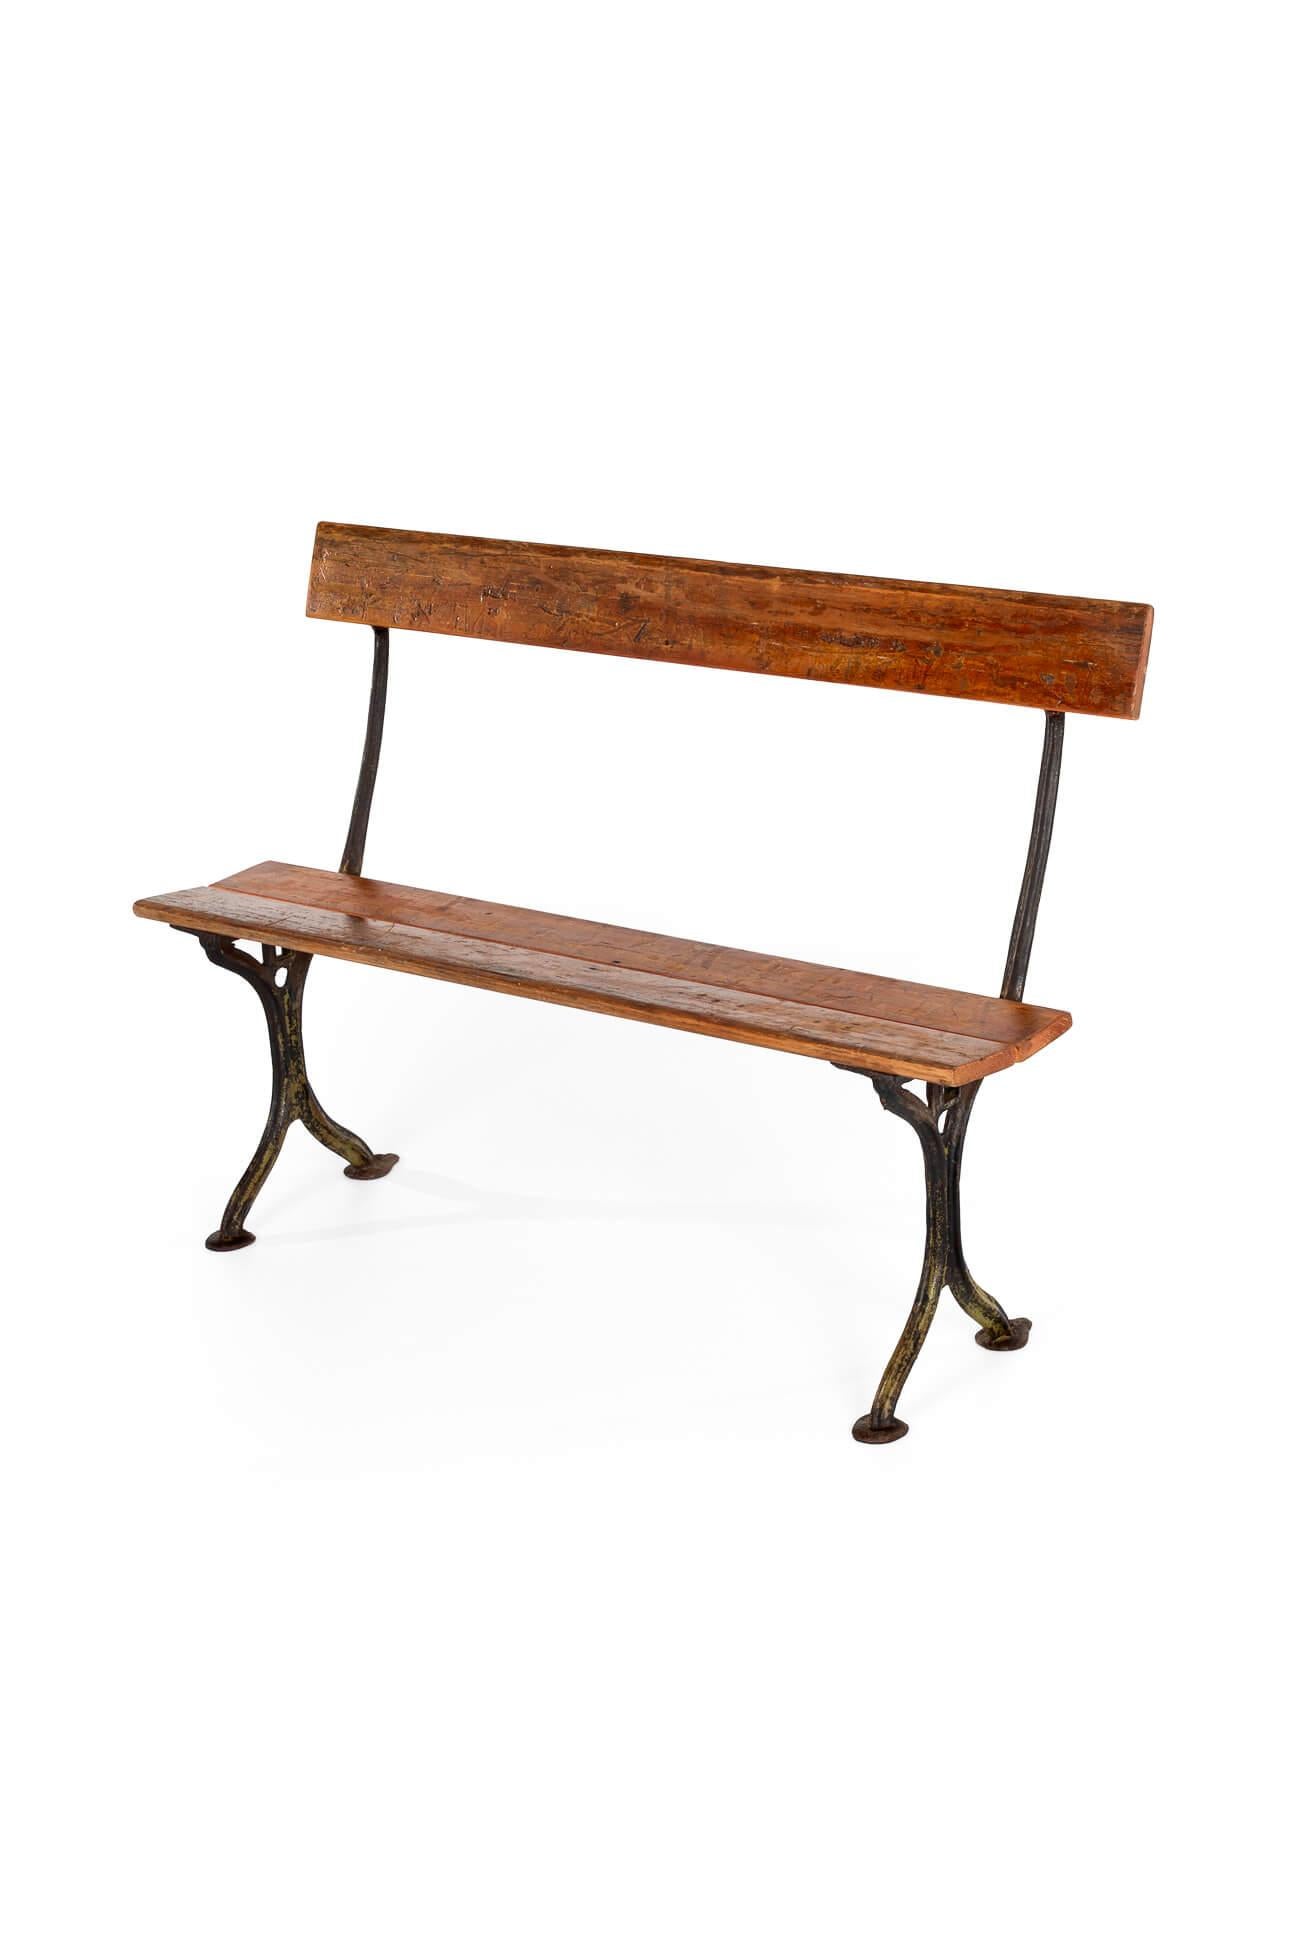 A simple, diminutive Edwardian ironwork bench.

The seat and backrest, both in beech, are supported by a pair of ironwork supports and finished on beaten pad feet.

Strong and sturdy with no rocks or wobbles.

Traces of the original green paint on